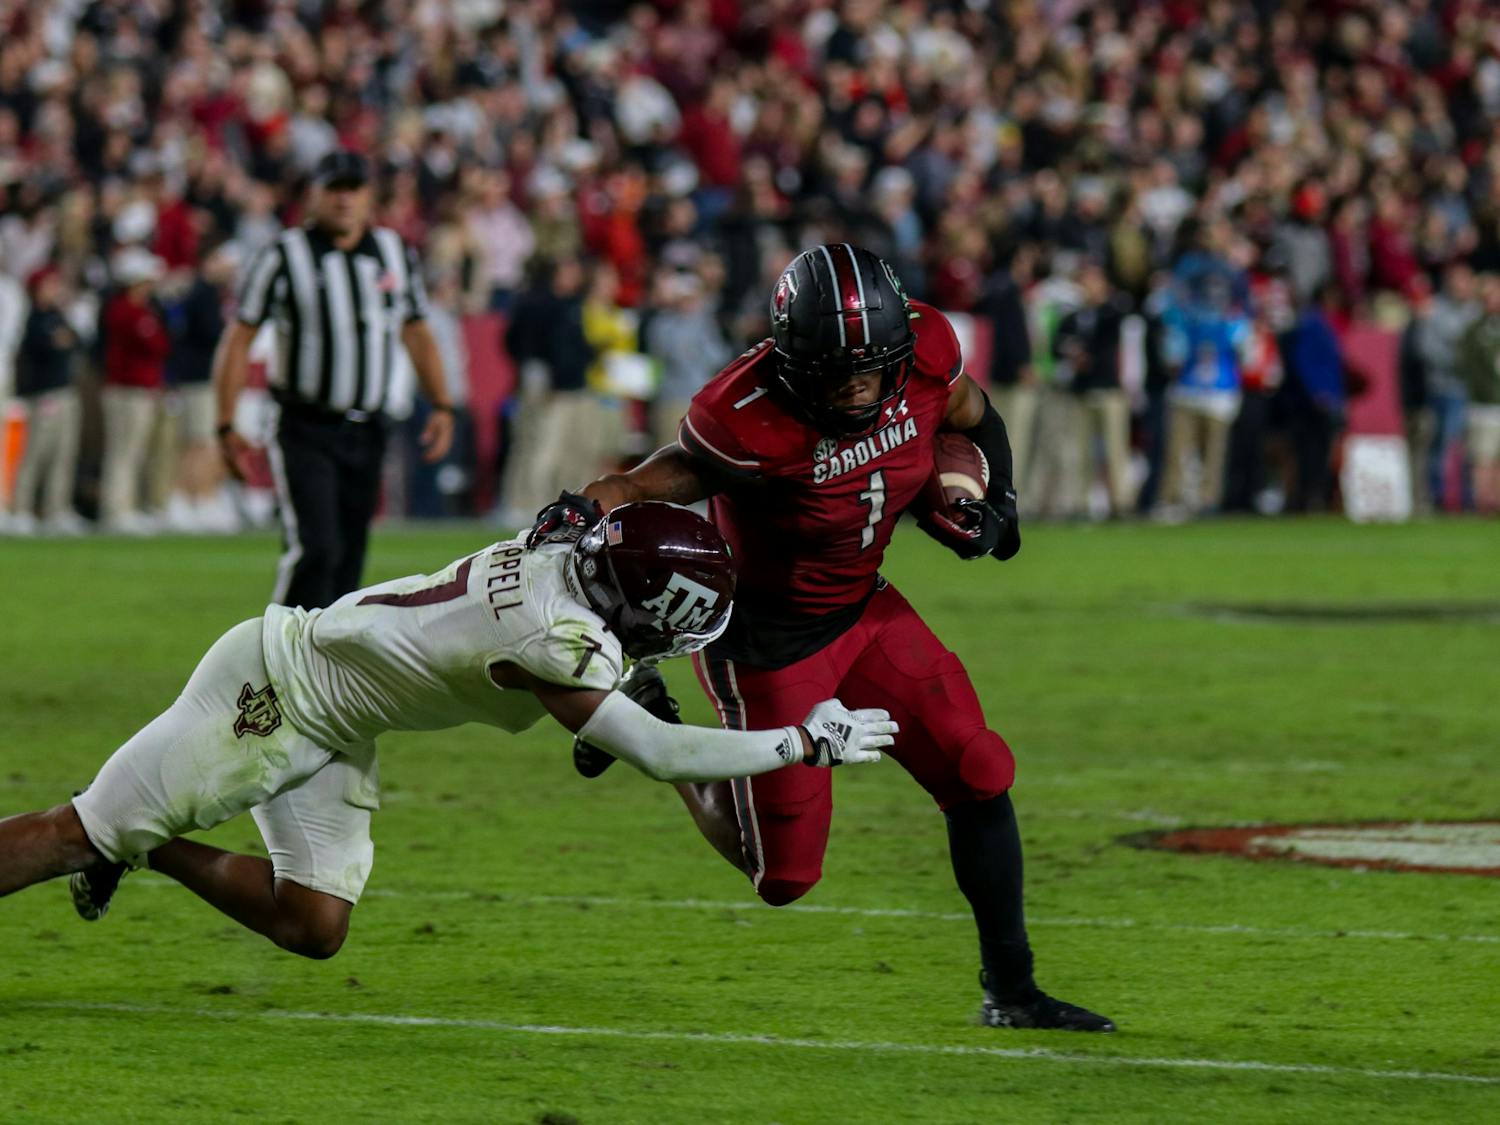 Redshirt sophomore running back MarShawn Lloyd breaks a tackle for big gain during the fourth quarter against the Texas A&amp;M Aggies at Williams-Brice Stadium on Oct. 22, 2022. South Carolina defeated Texas A&amp;M 30-24.